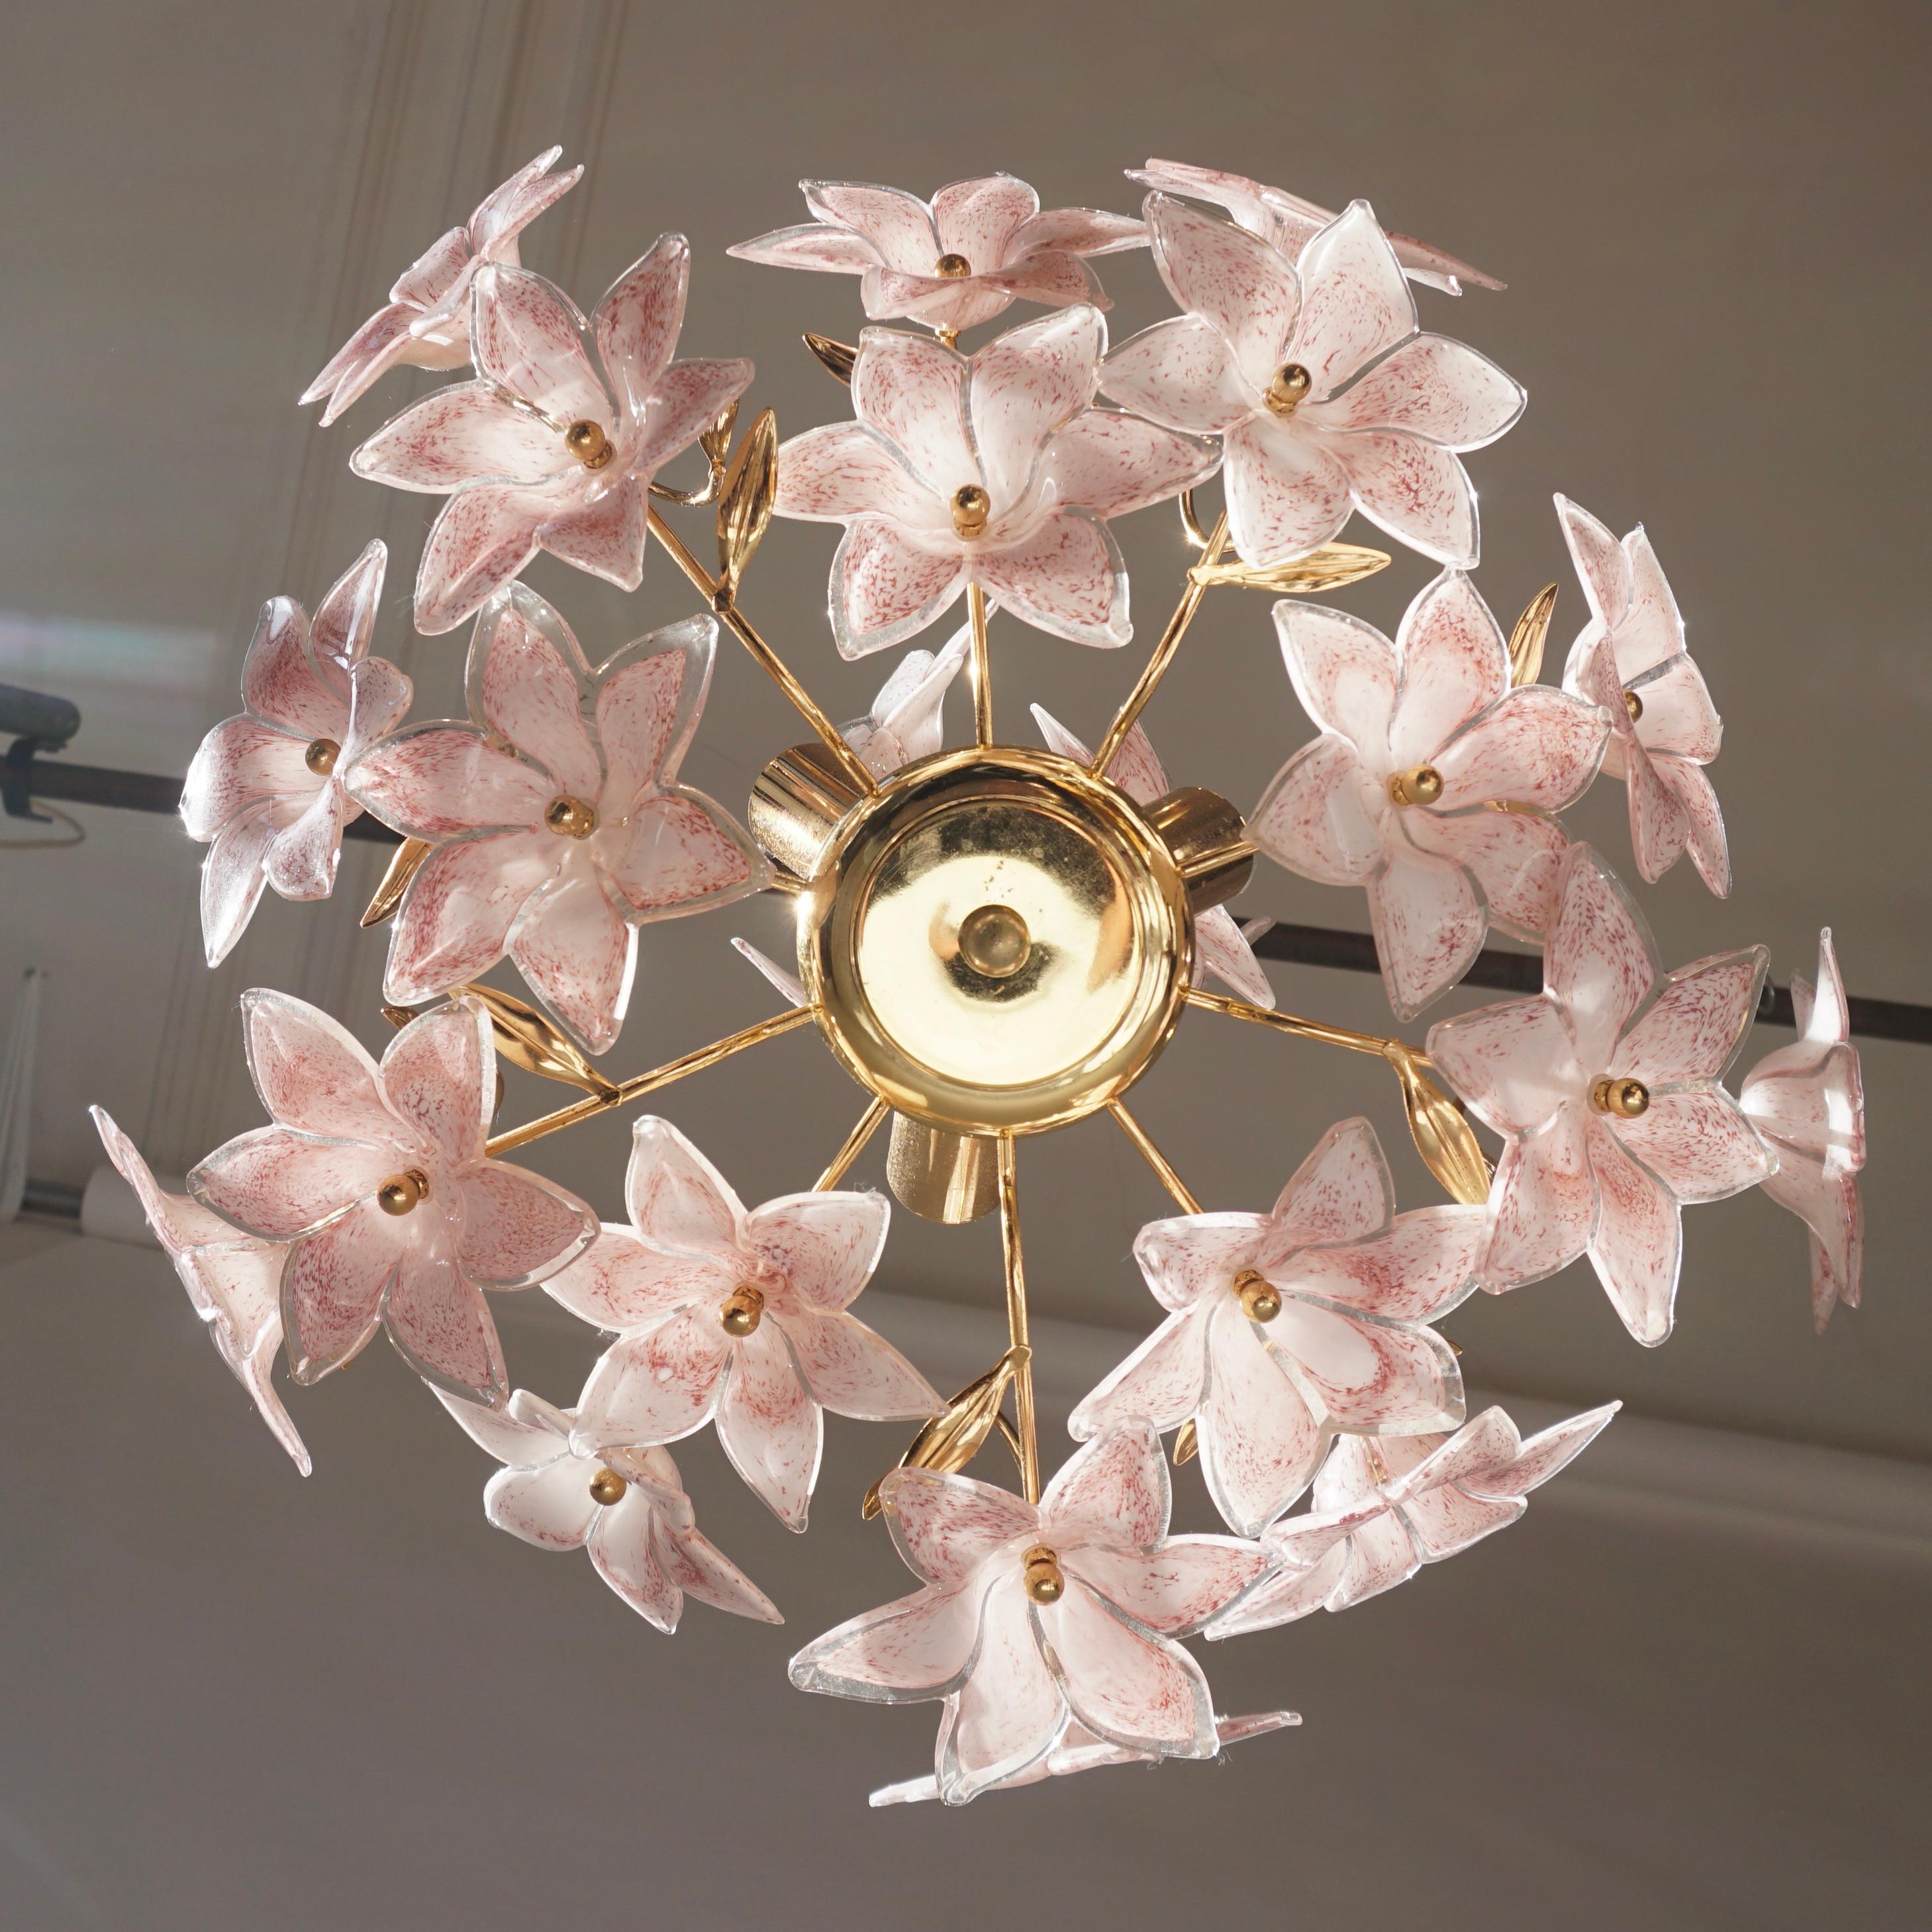 Set of 2 Italian Brass Chandeliers with White Pink Colored Murano Glass Flowers For Sale 2